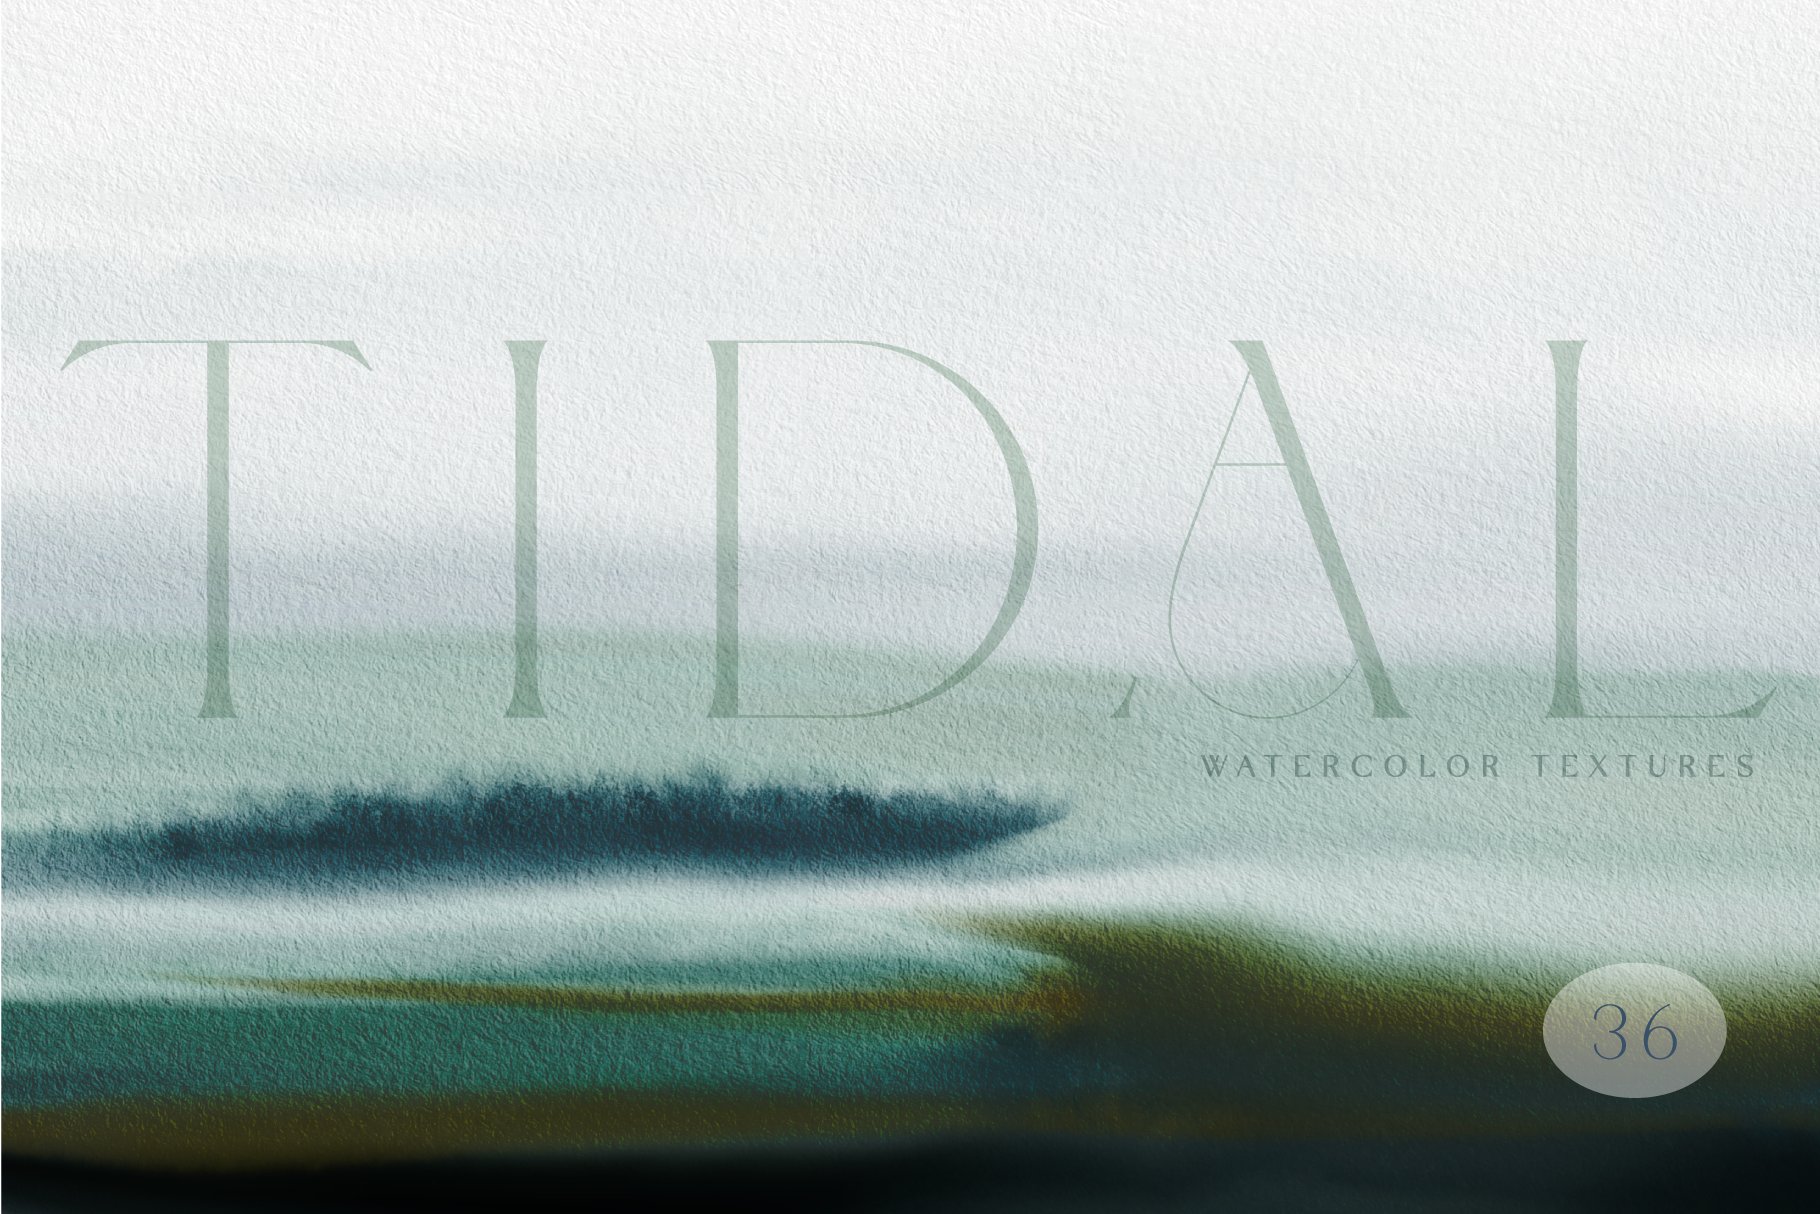 Tidal - Watercolor Textures cover image.